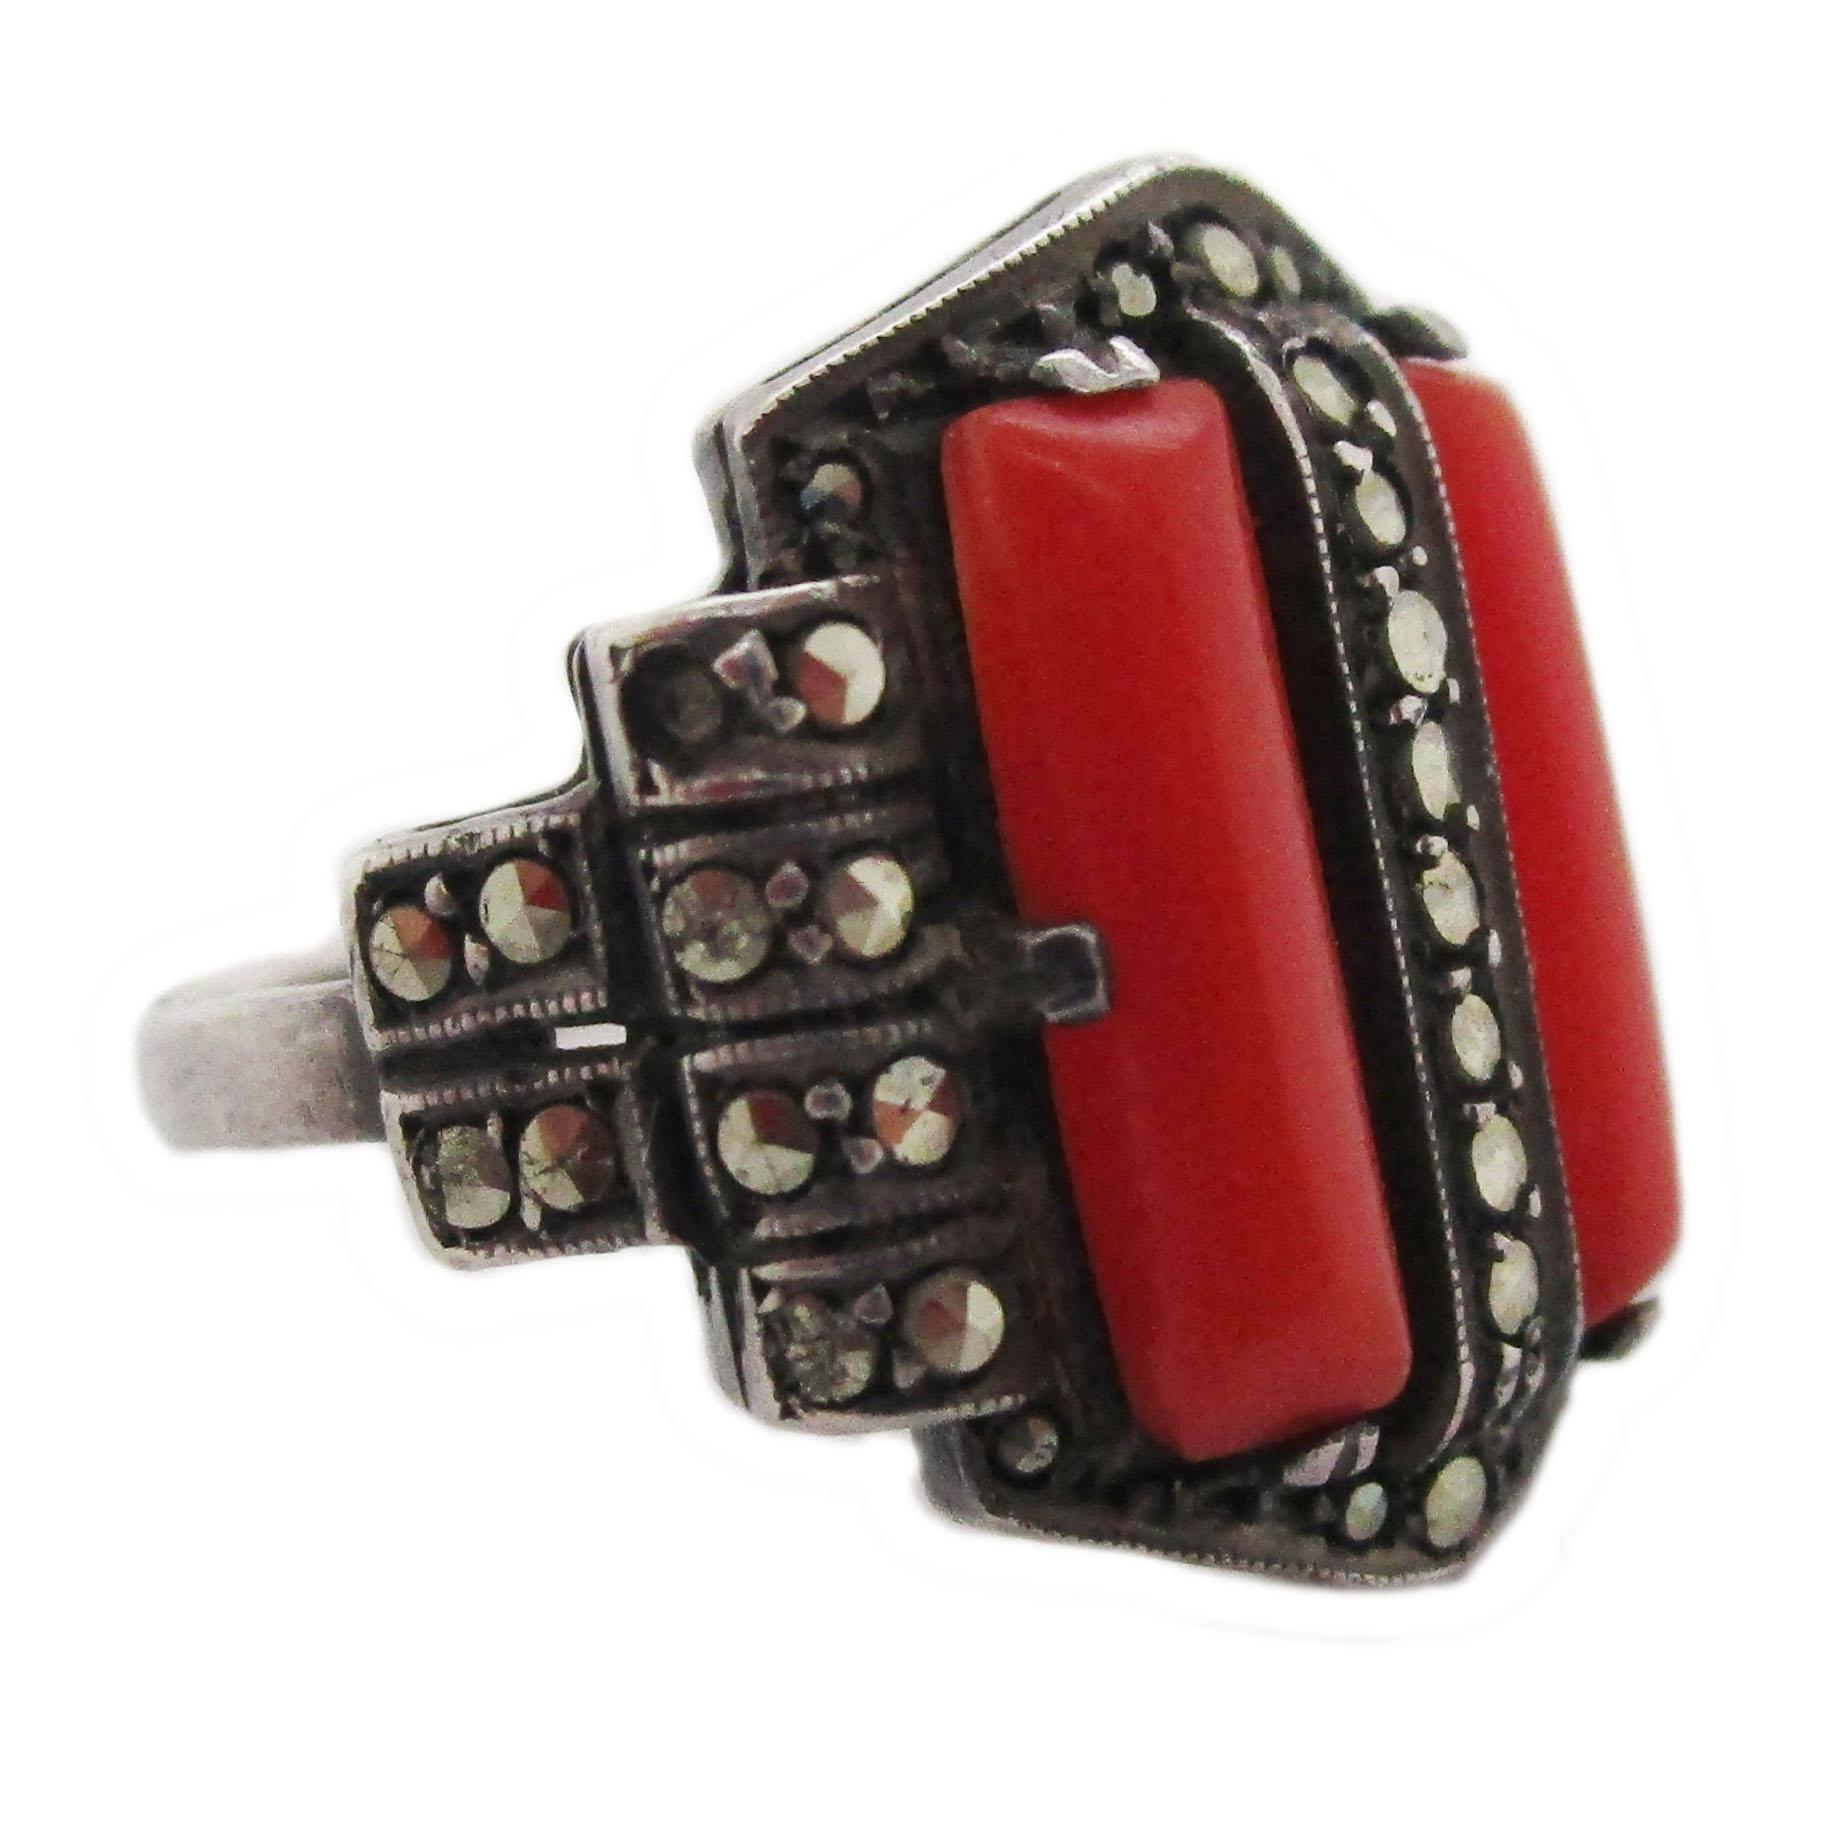 This fantastic ring is the Art Deco handiwork of Theodore Fahrner and features a flawless combination of bright sterling silver, reflective marcasite, and bright natural red coral. The hexagonal design and linear nature of the ring are classic